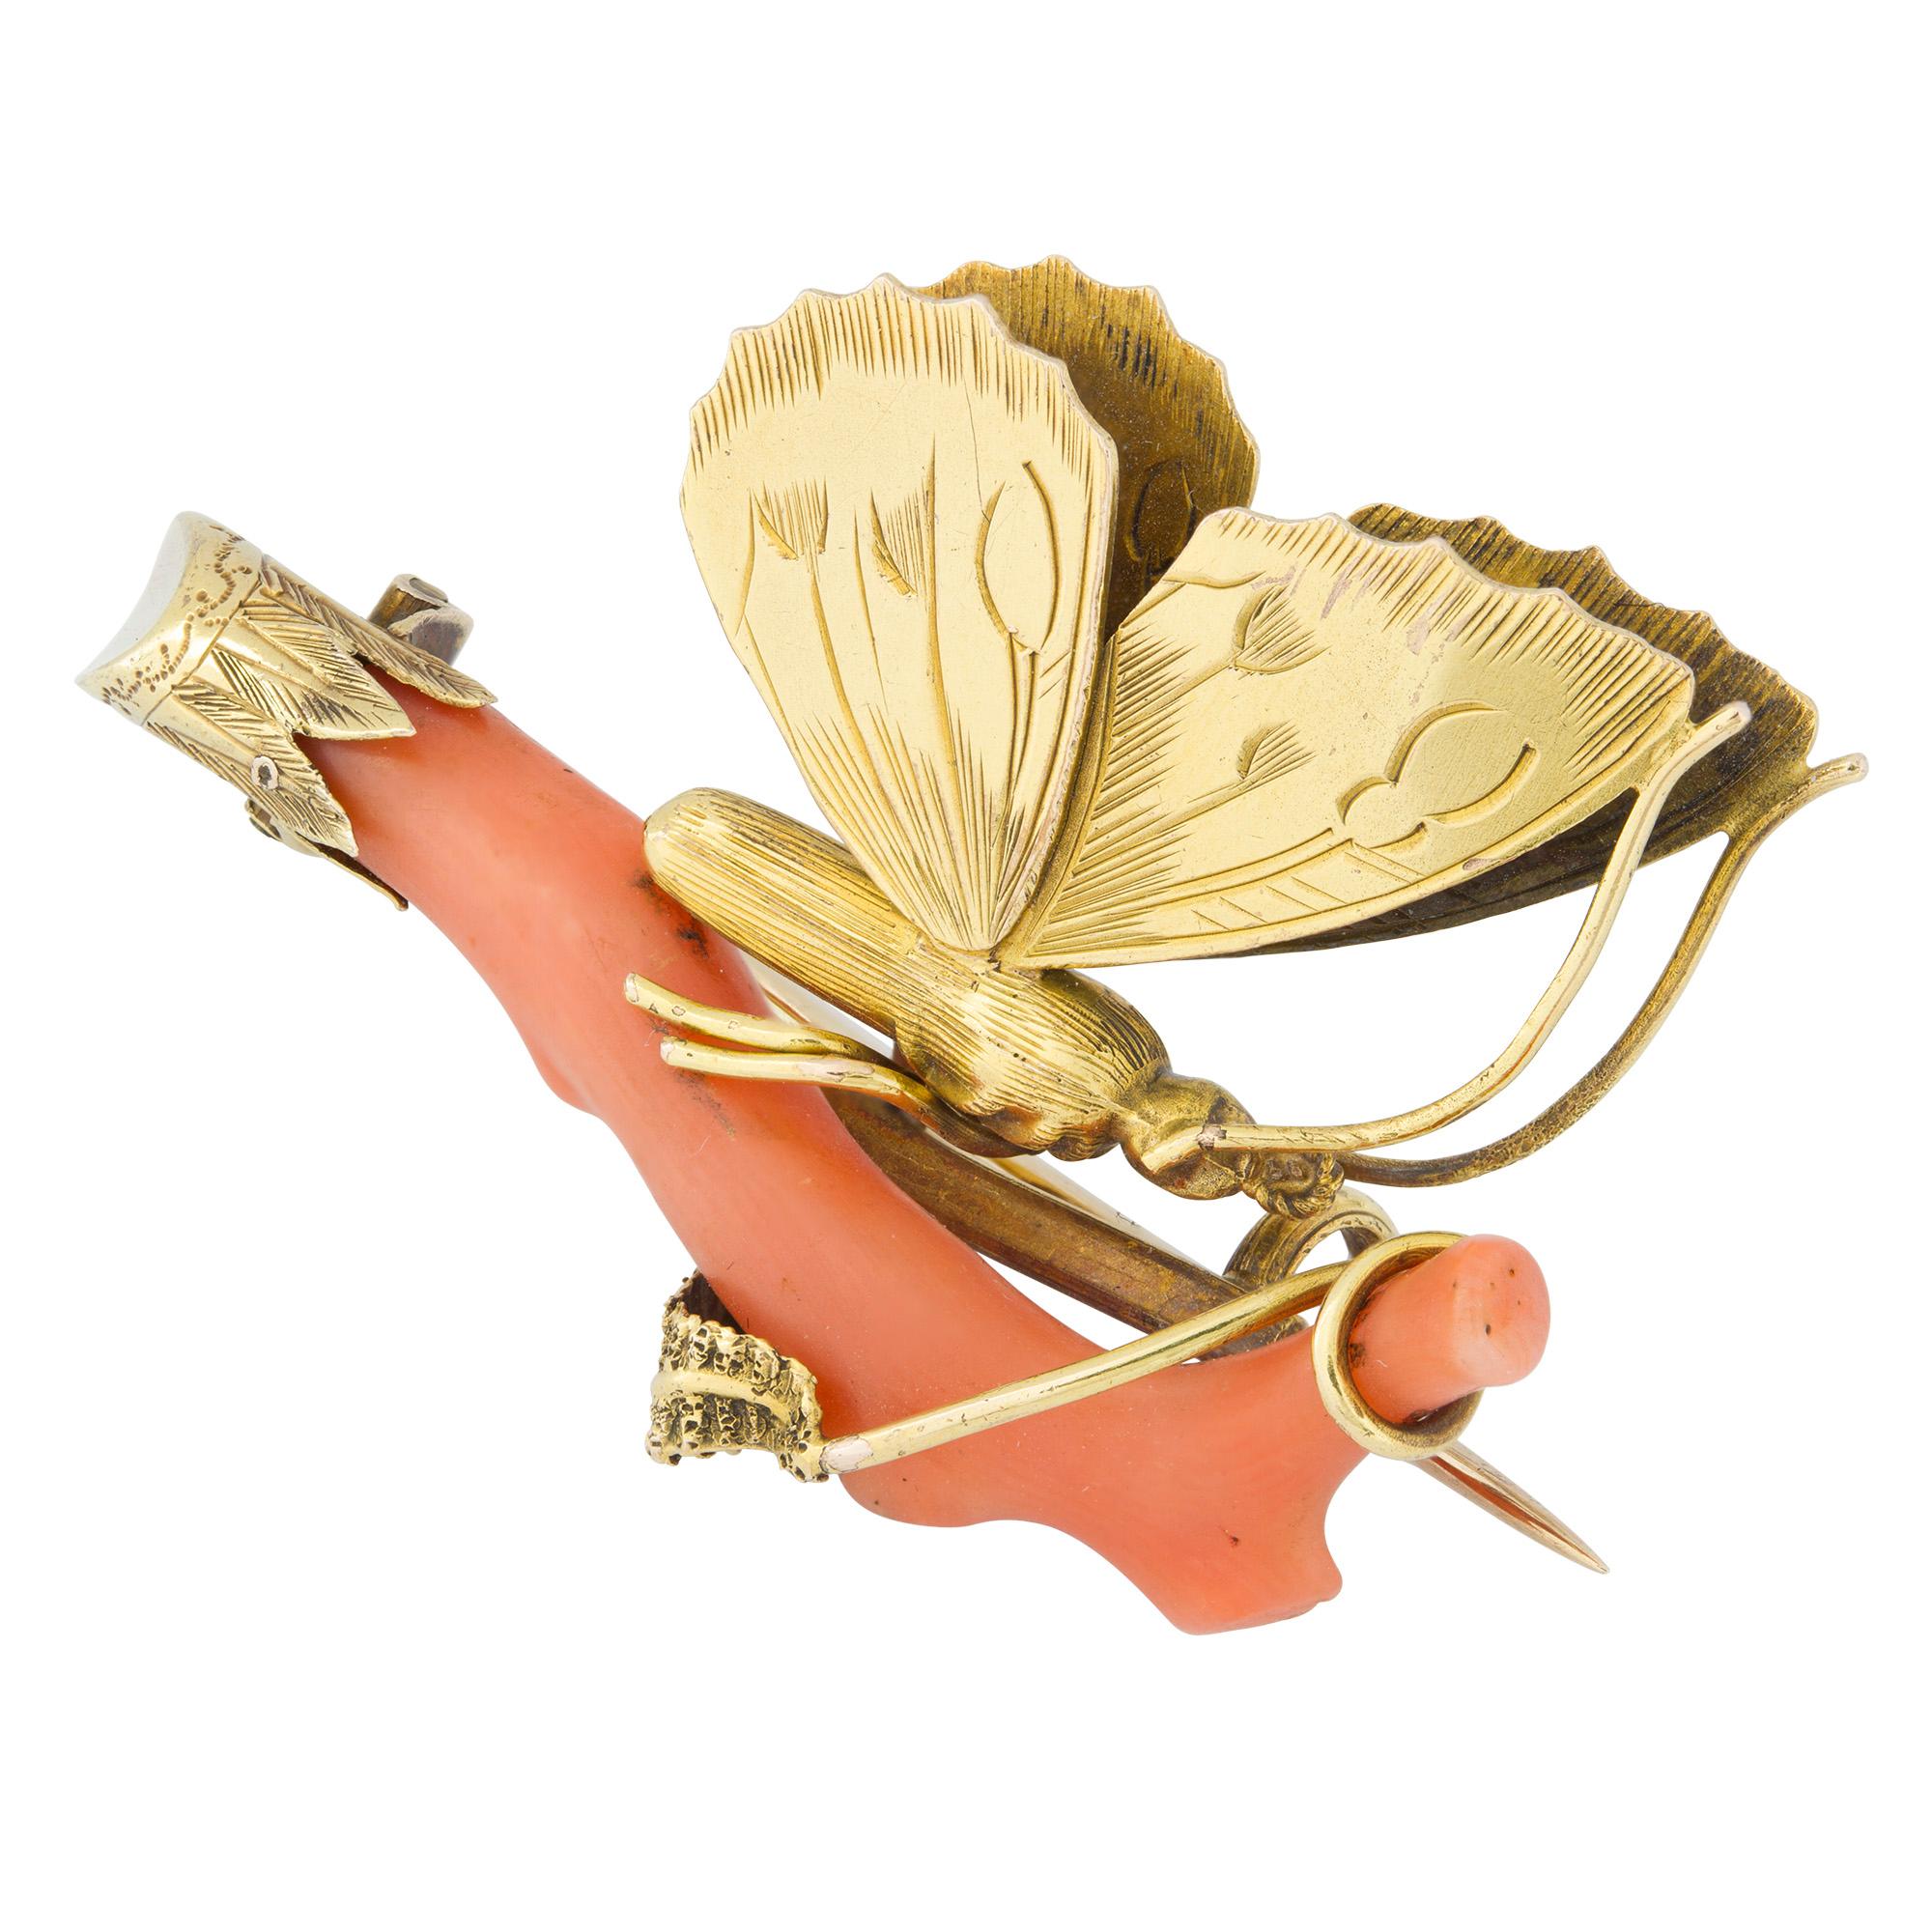 A late nineteenth century gold and coral brooch, the coral branch with patterned gold foliate design to tip, supporting a yellow gold butterfly with engraved wing and body, measuring approximately 4cm x 2.6cm, circa 1890, gross weight 5.4